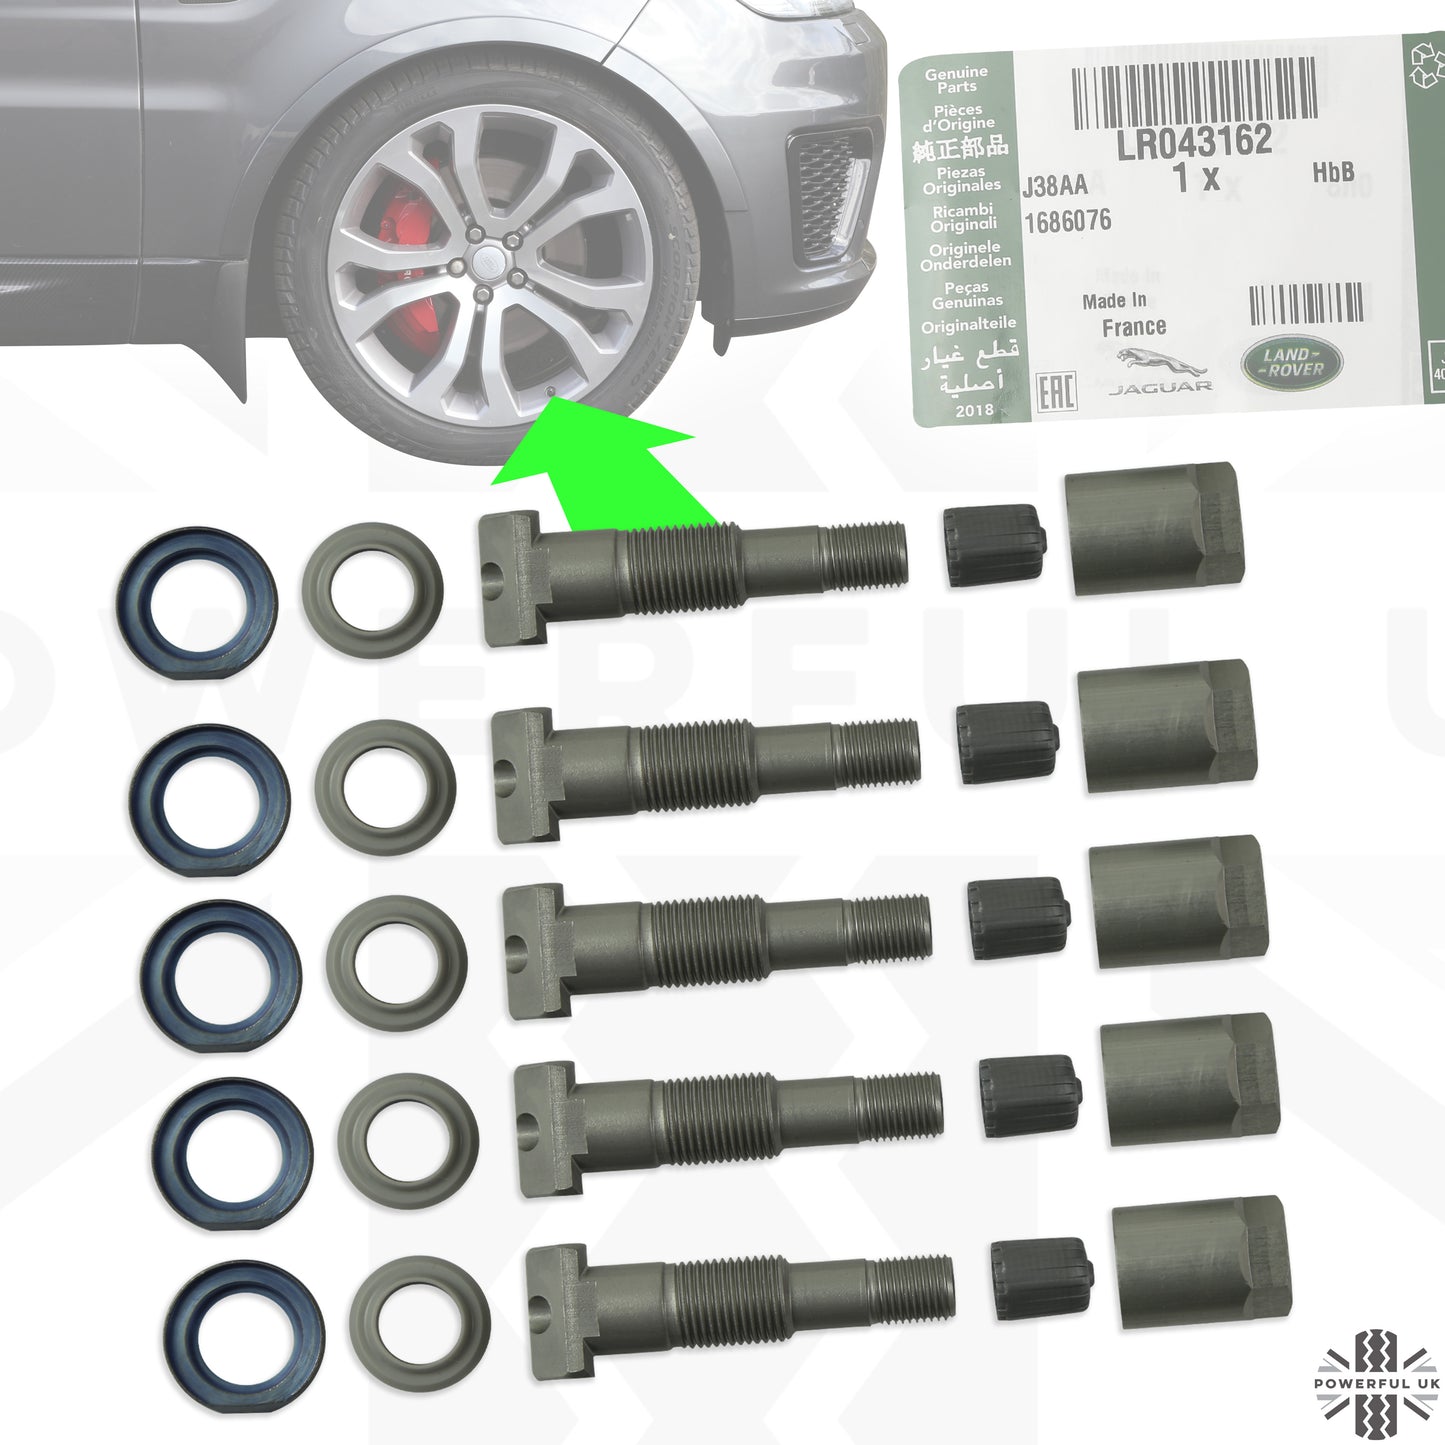 Tyre Pressure Monitoring System (TPMS) Service Kit Range Rover Evoque